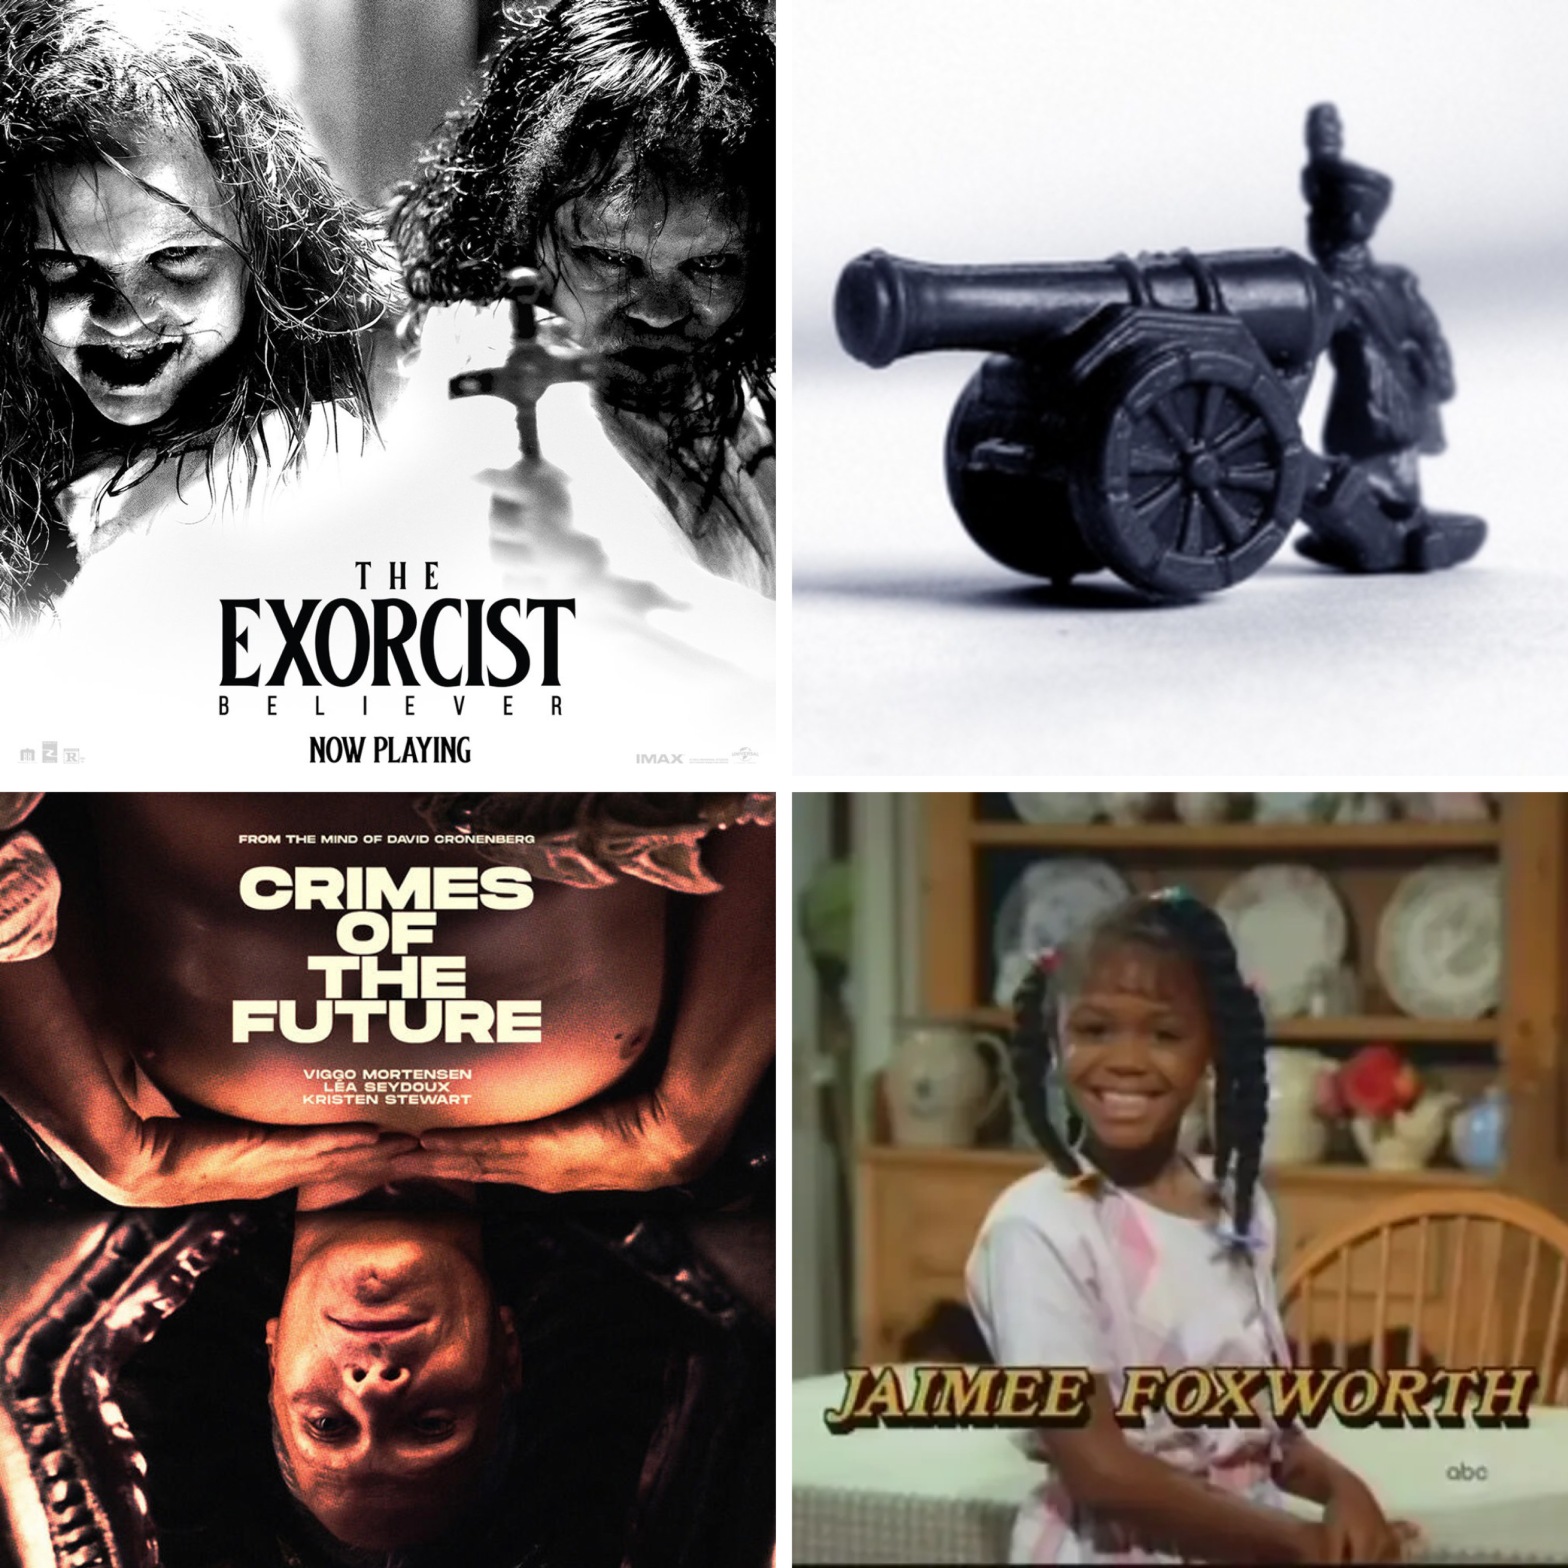 The Exorcist: Believer, a cannon from the board game Risk, David Cronenberg's Crimes of the Future, and Jaimee Foxworth as Judy Winslow.